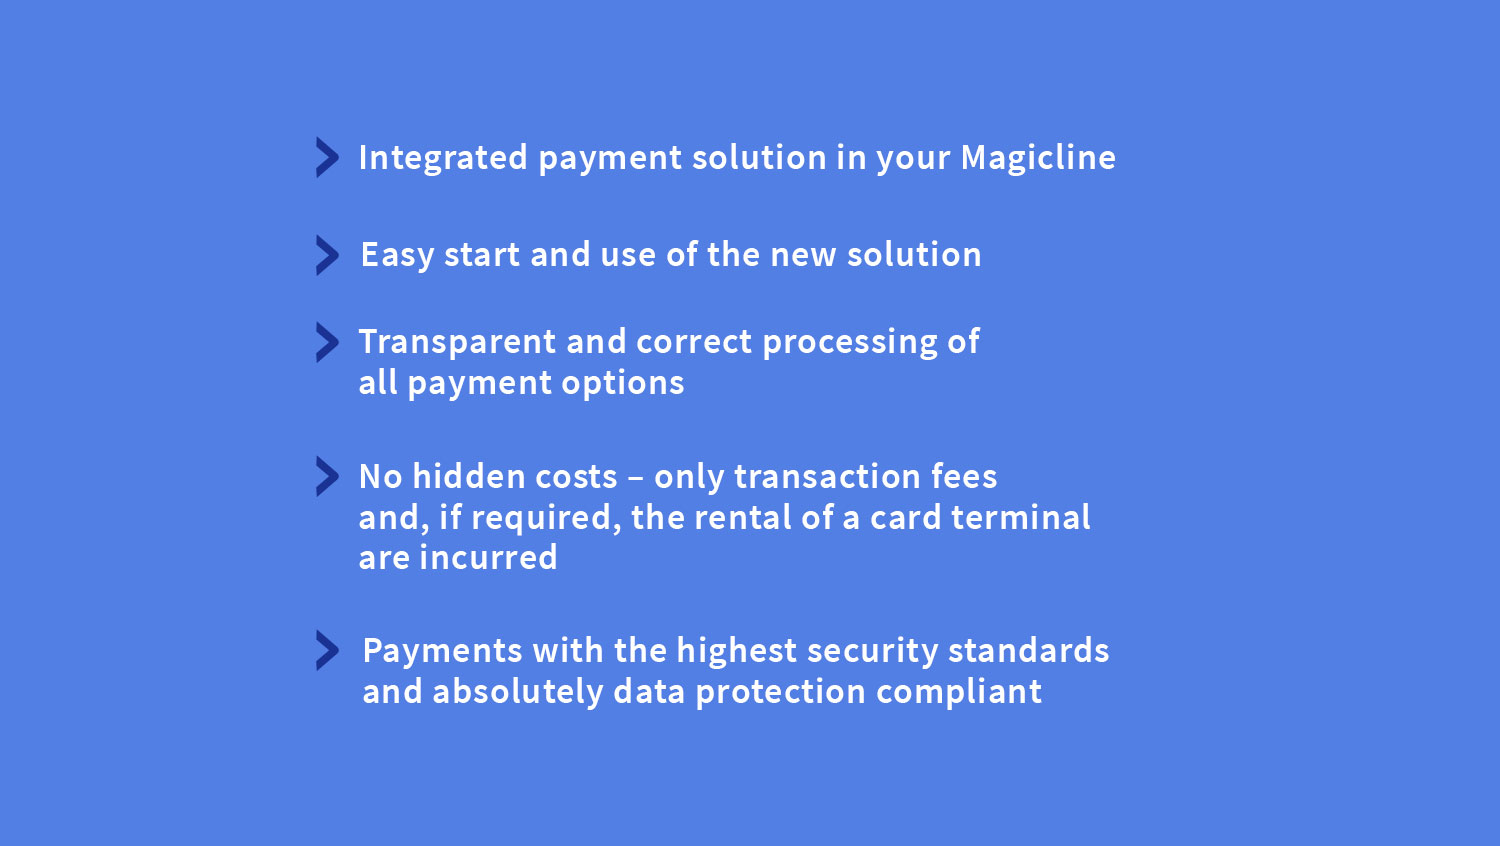 Advantages that are worth it- with Magicline Payments you have the perfect solution for payment transactions at your fingertips.